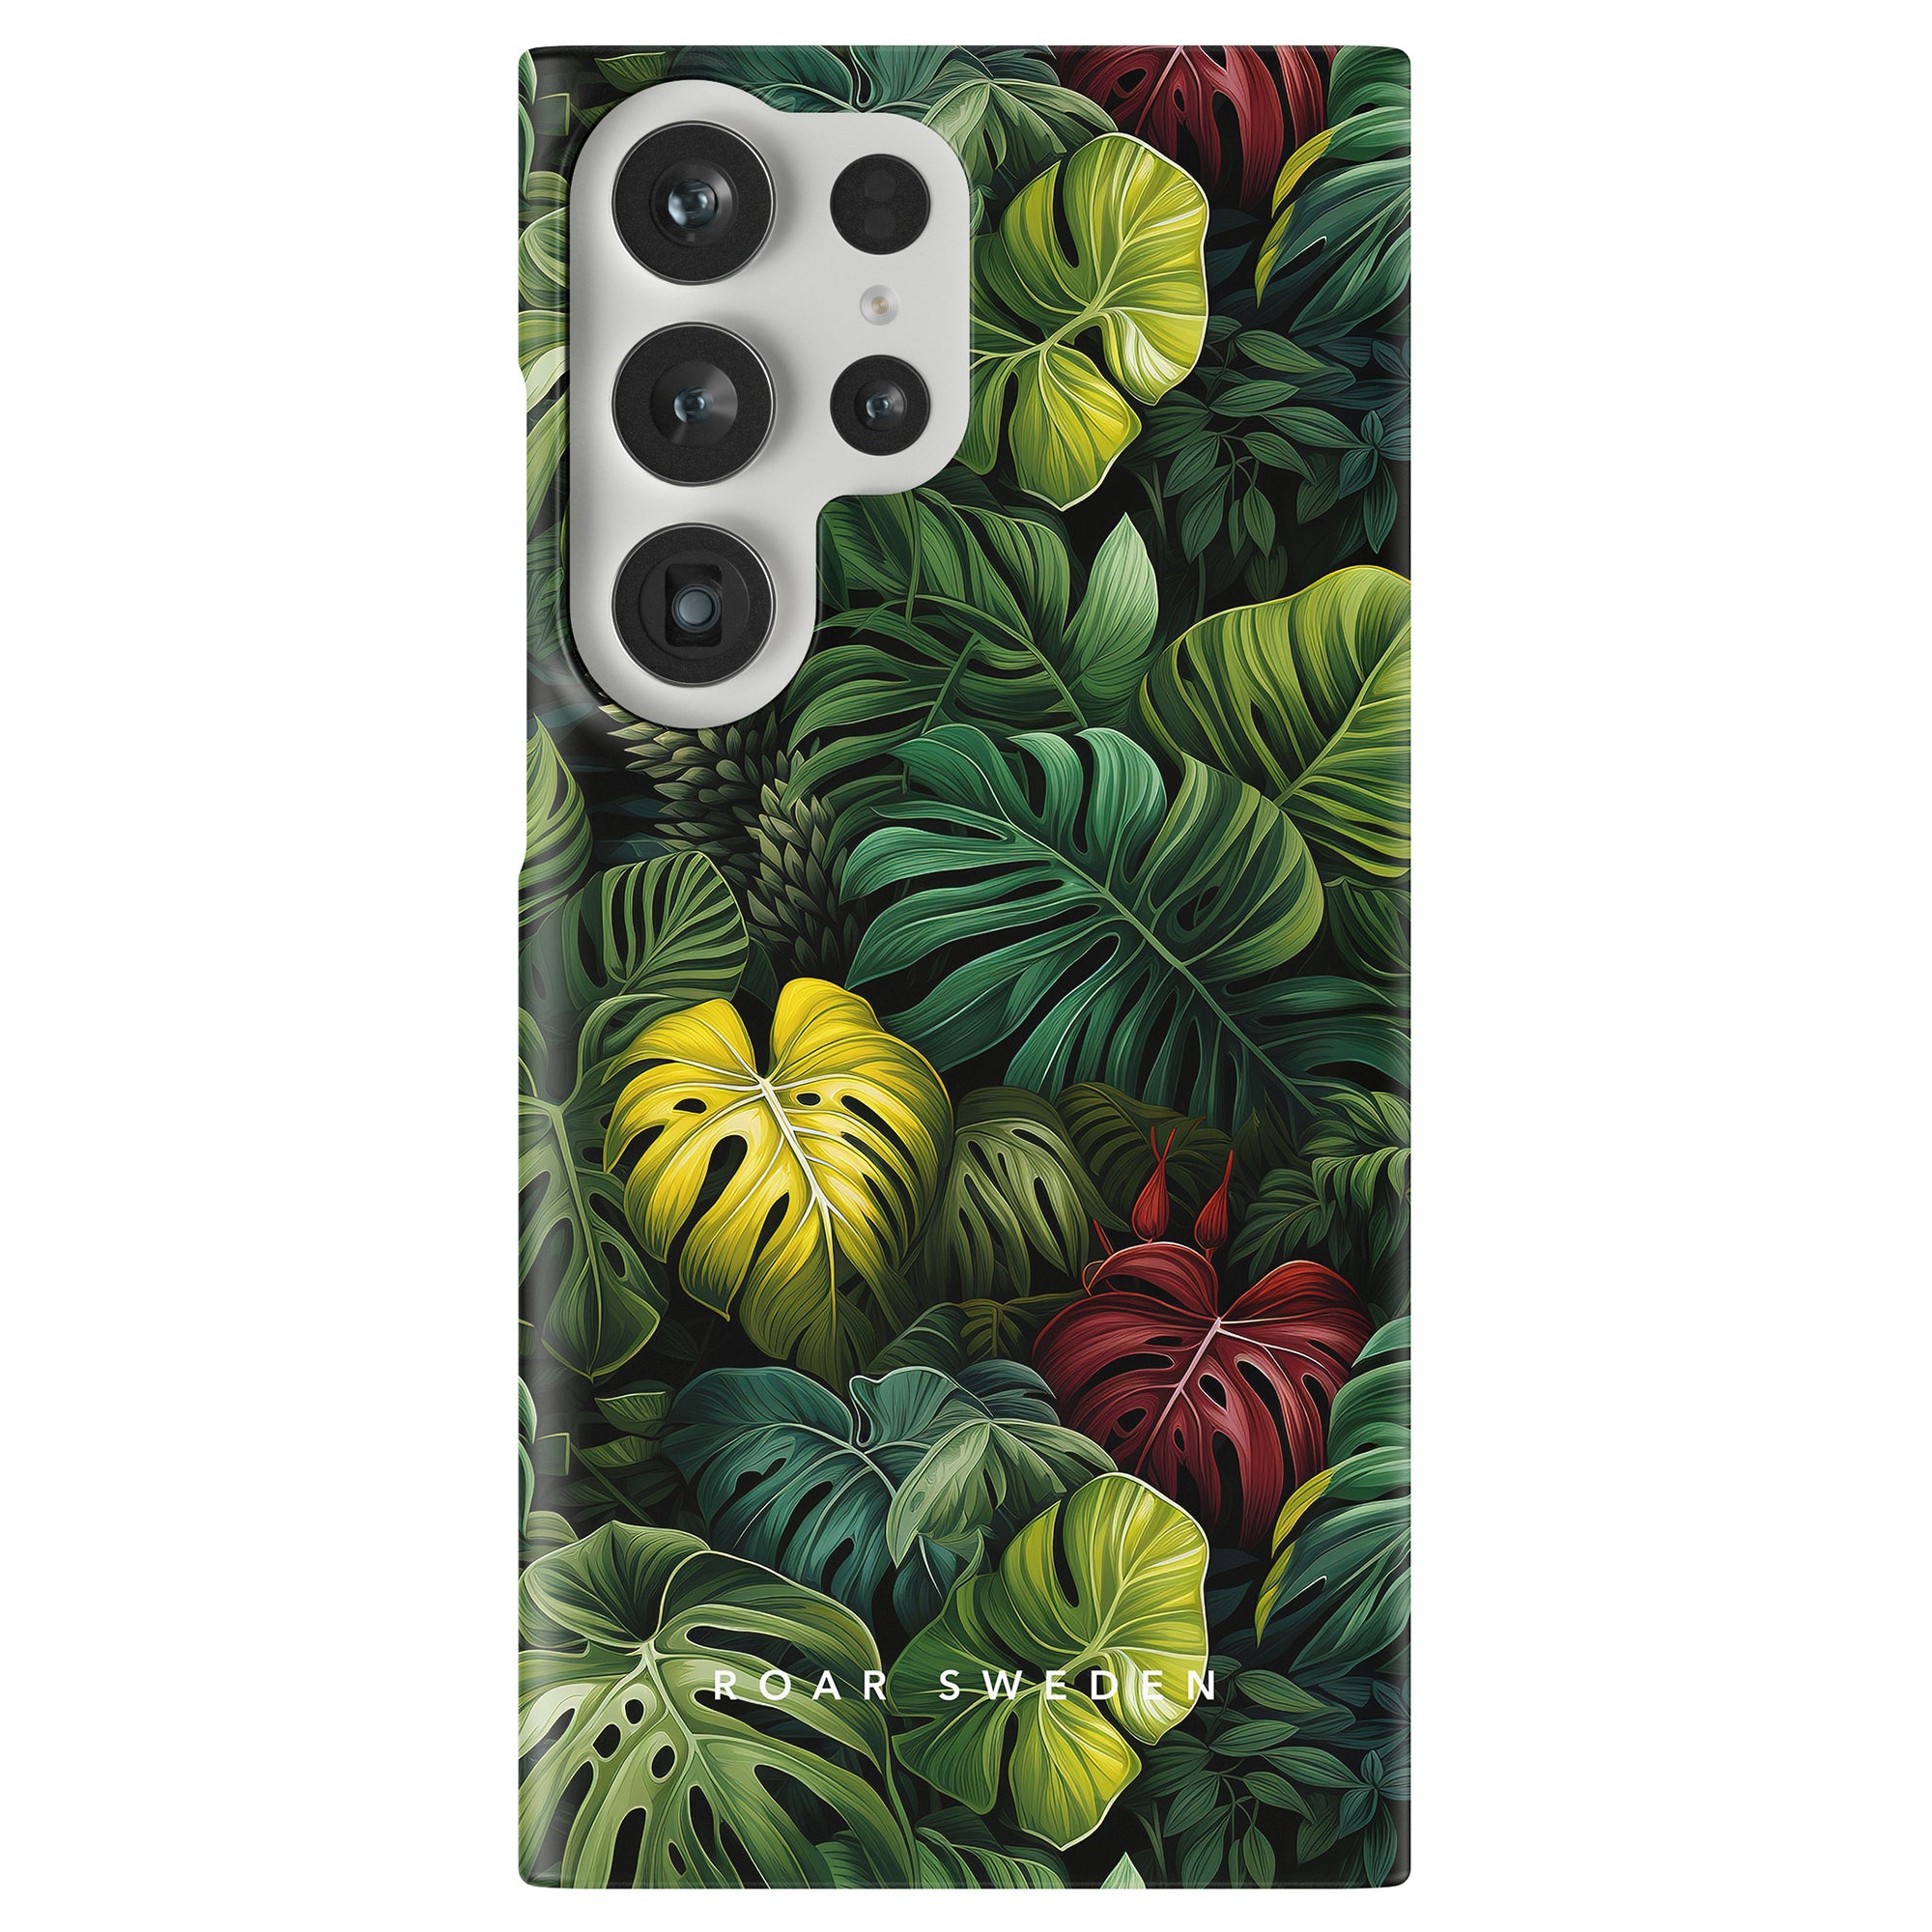 Close-up of a smartphone with a botanical-themed case featuring various green, yellow, and red tropical leaves. Part of the Jungle Collection, the Deliciosa - Slim case showcases Monstera Deliciosa leaves and has "ROAR SWEDEN" branding at the bottom.